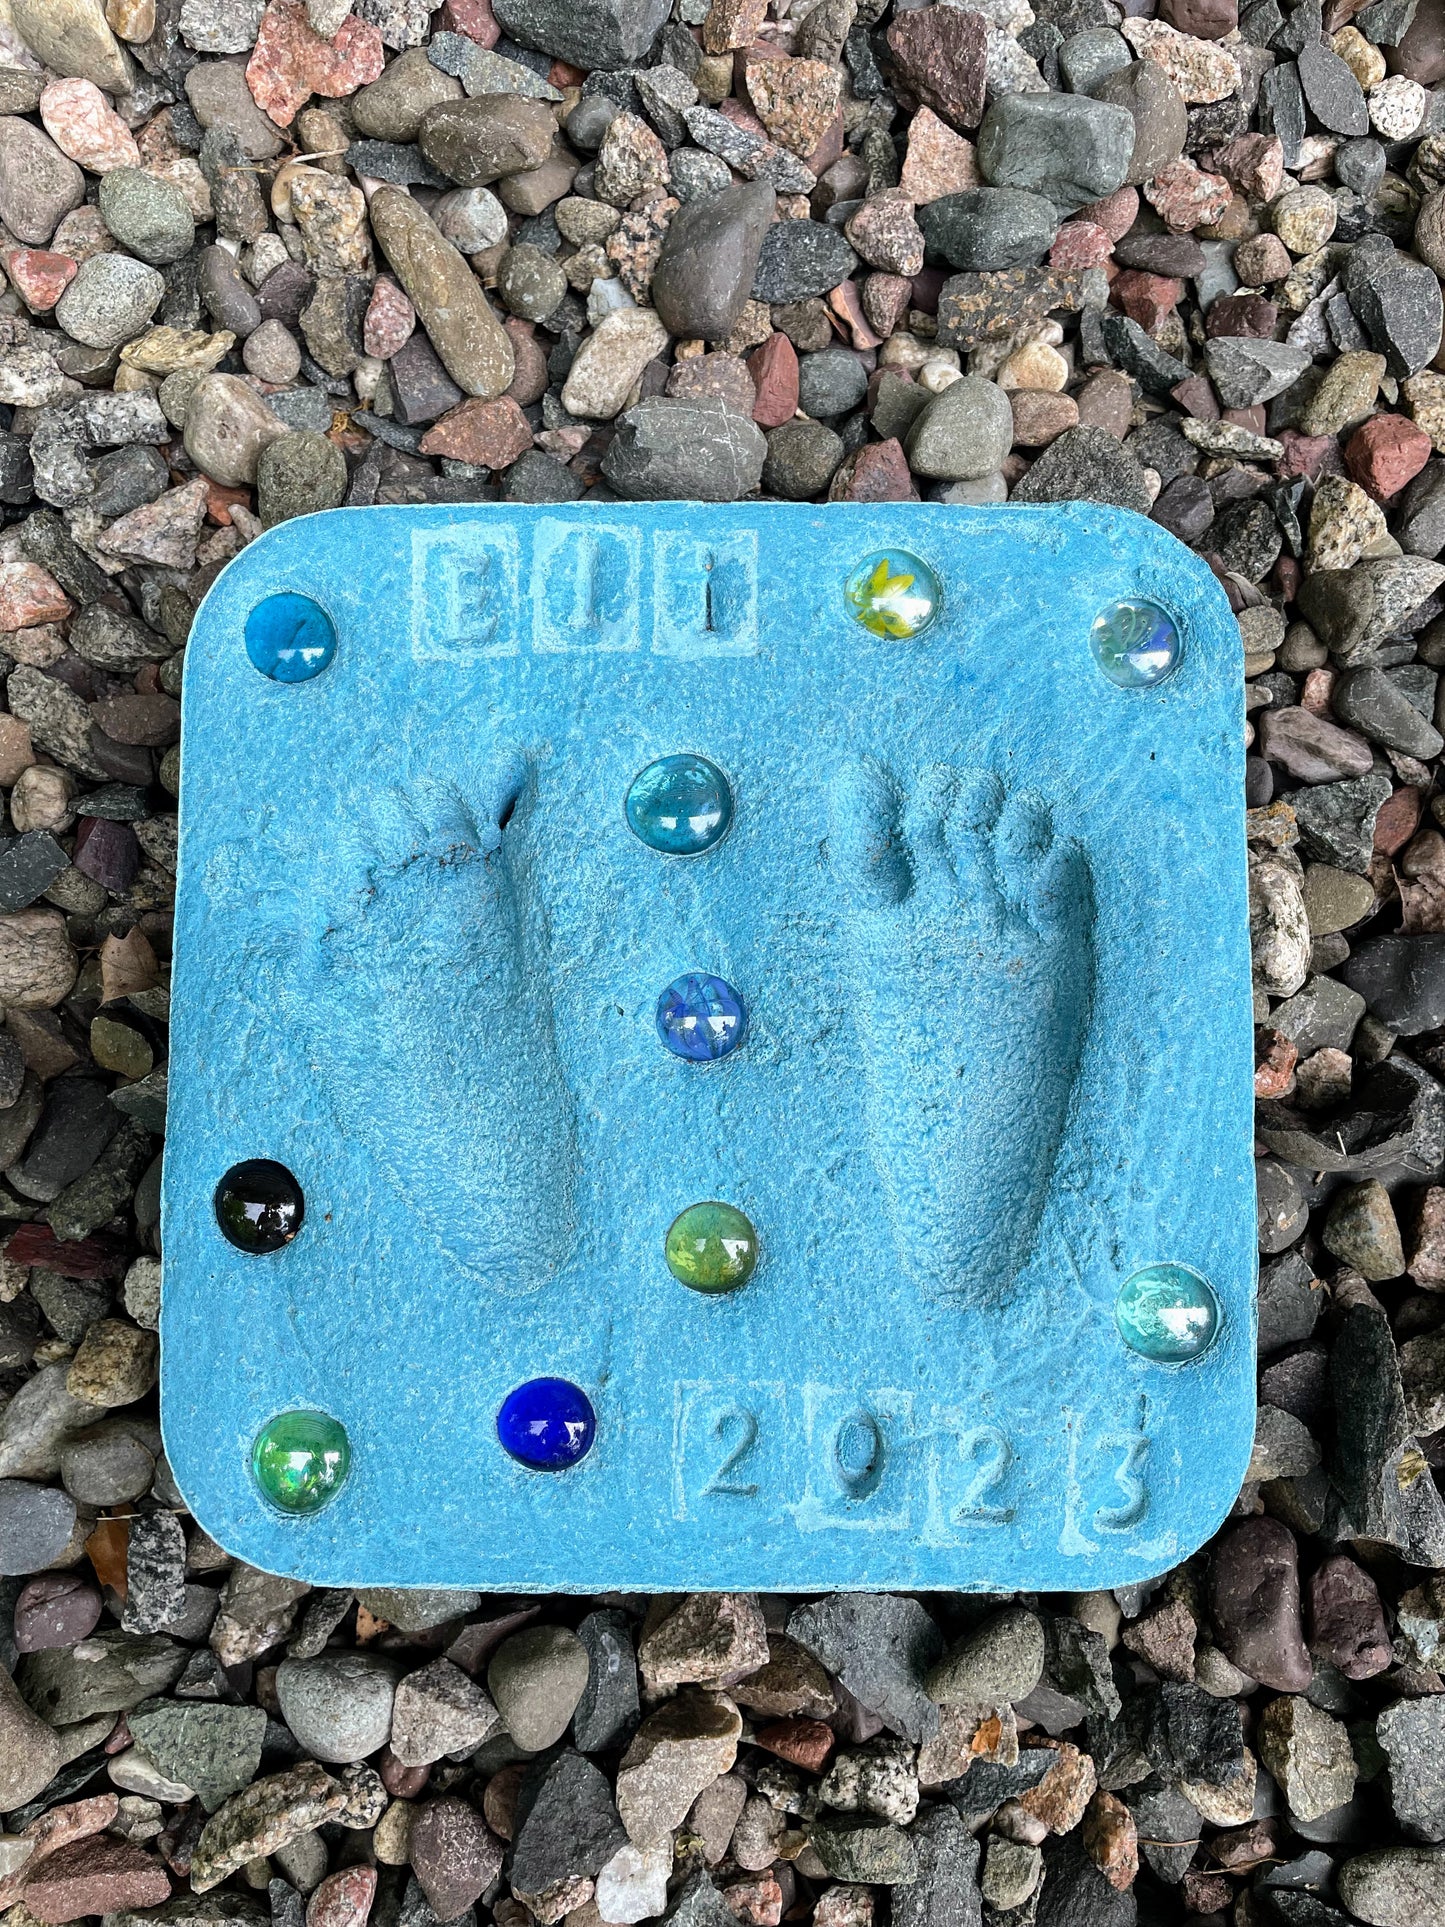 Blue square footprint stepping stone